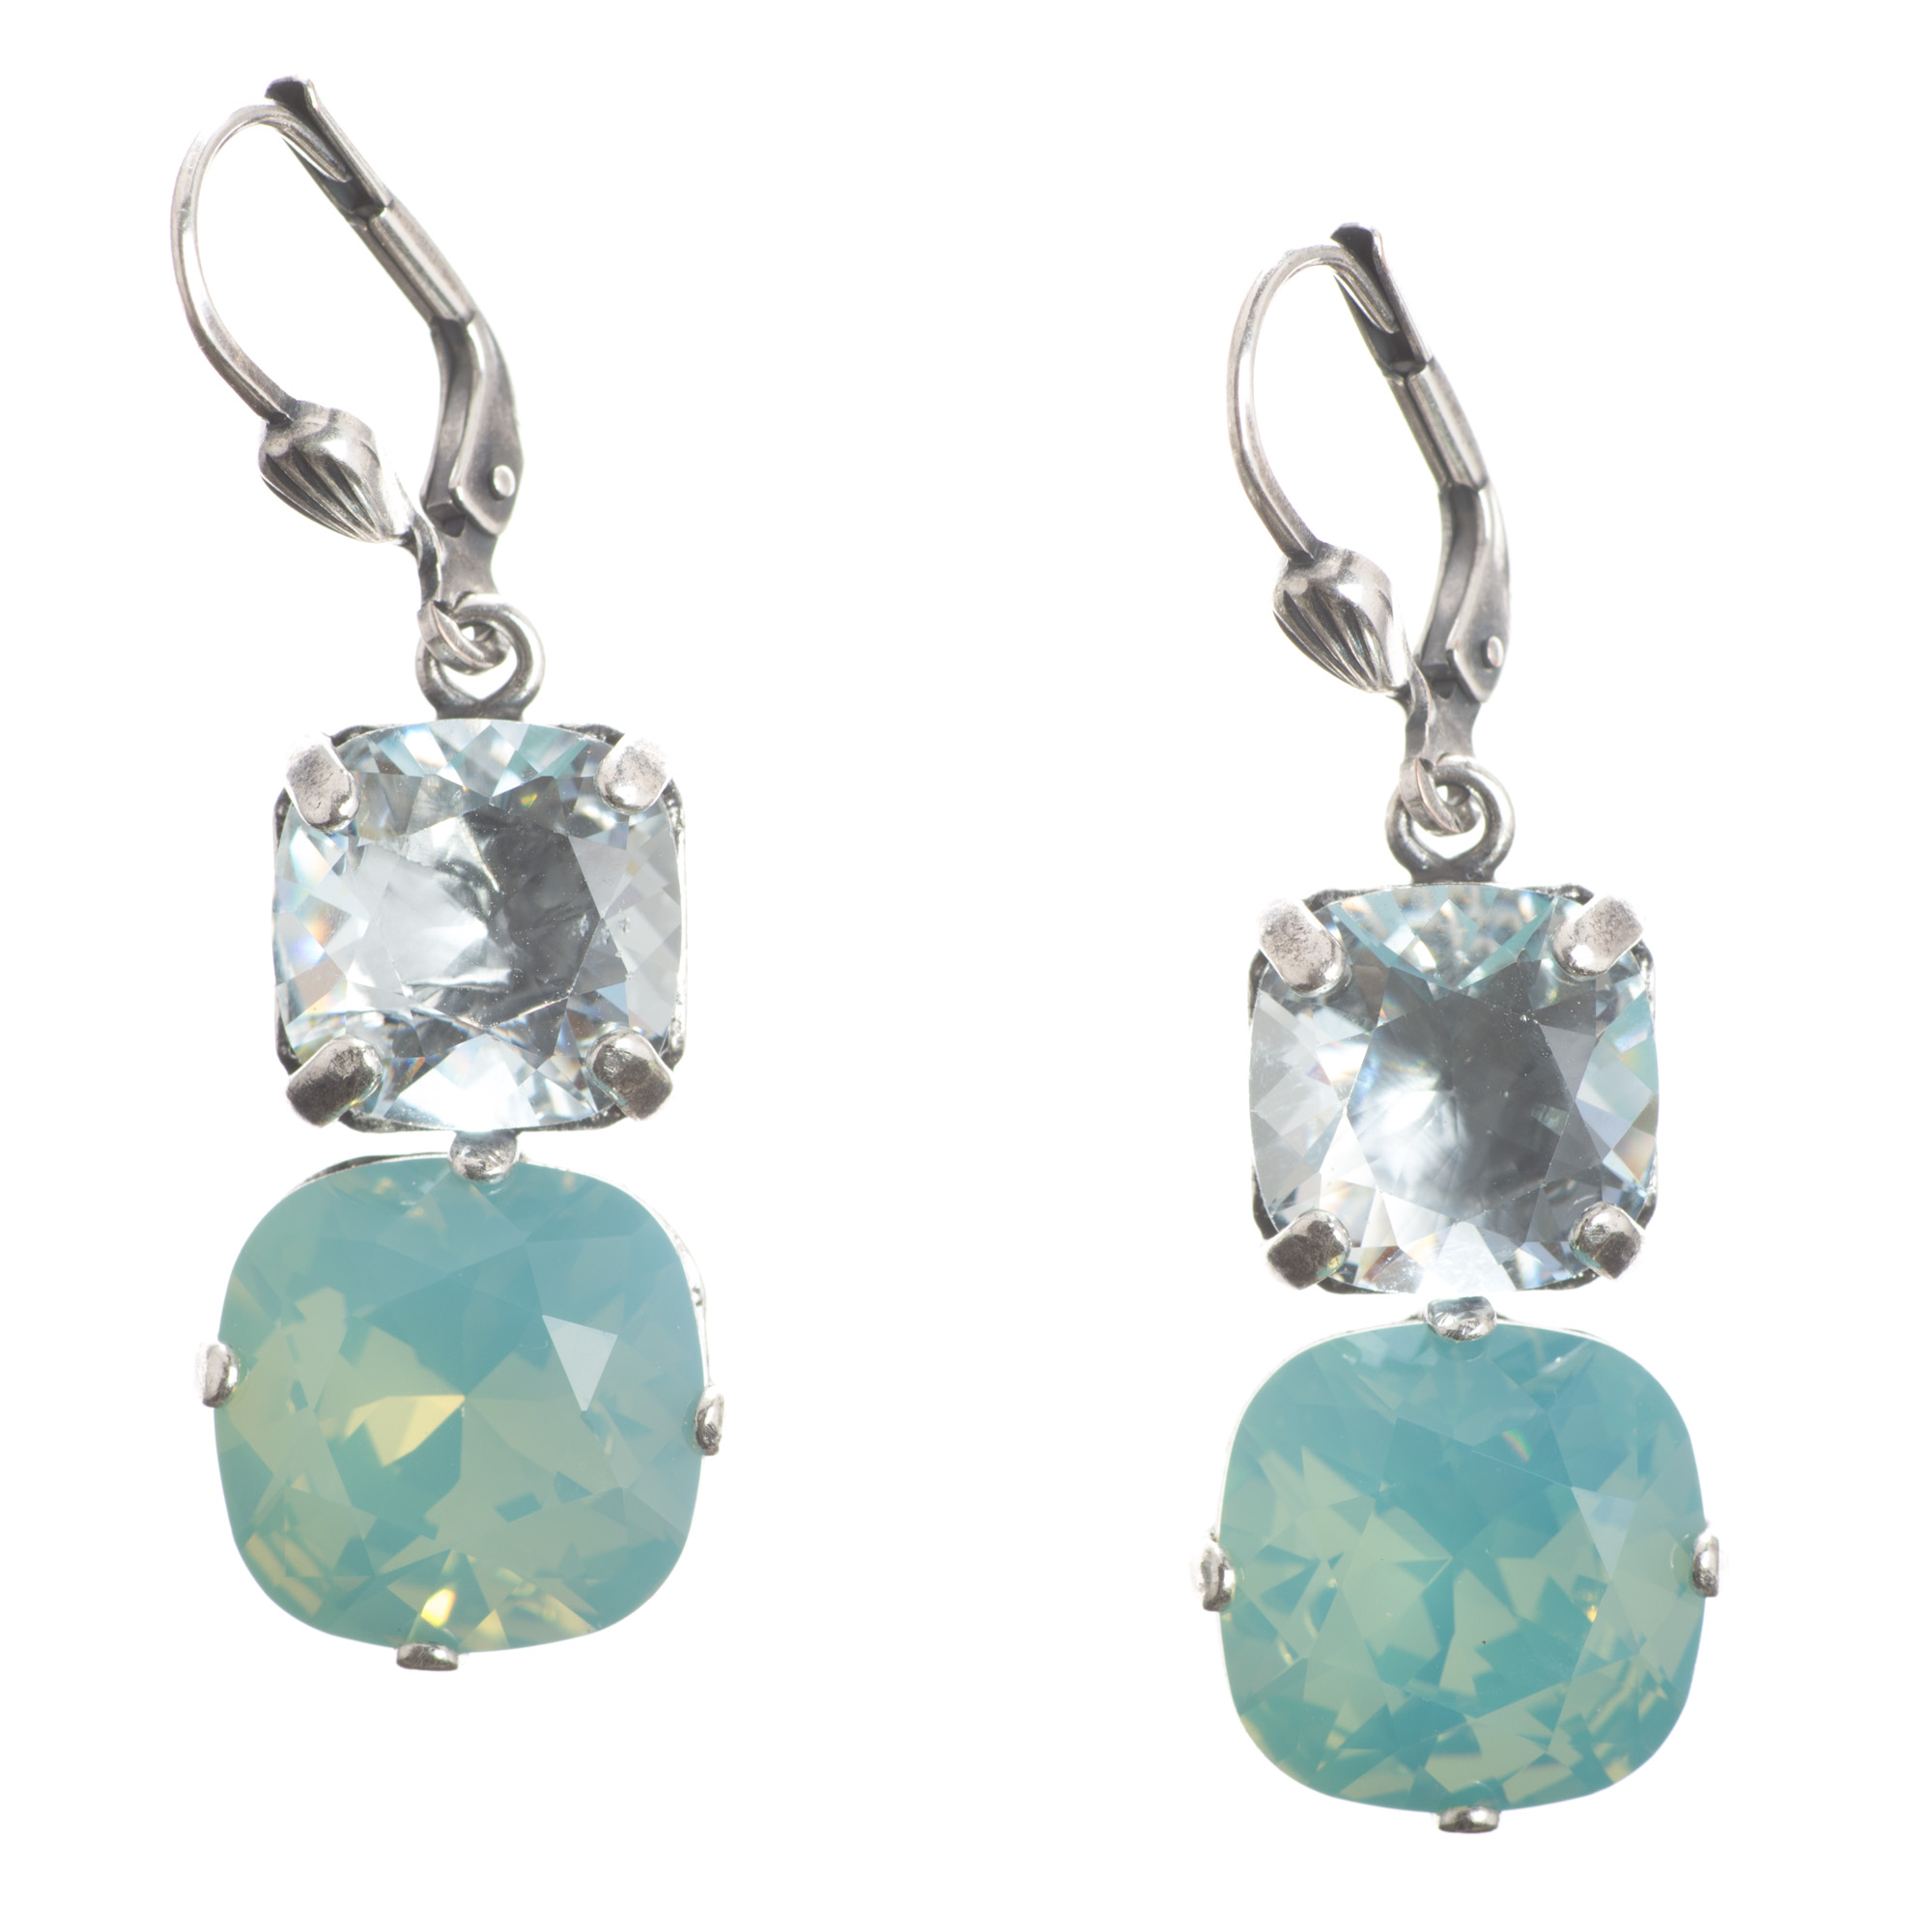 catherine-popesco-large-medium-stone-crystal-combo-earrings-pacific-opal-ice-in-silver-LV-6503-PO-ICE